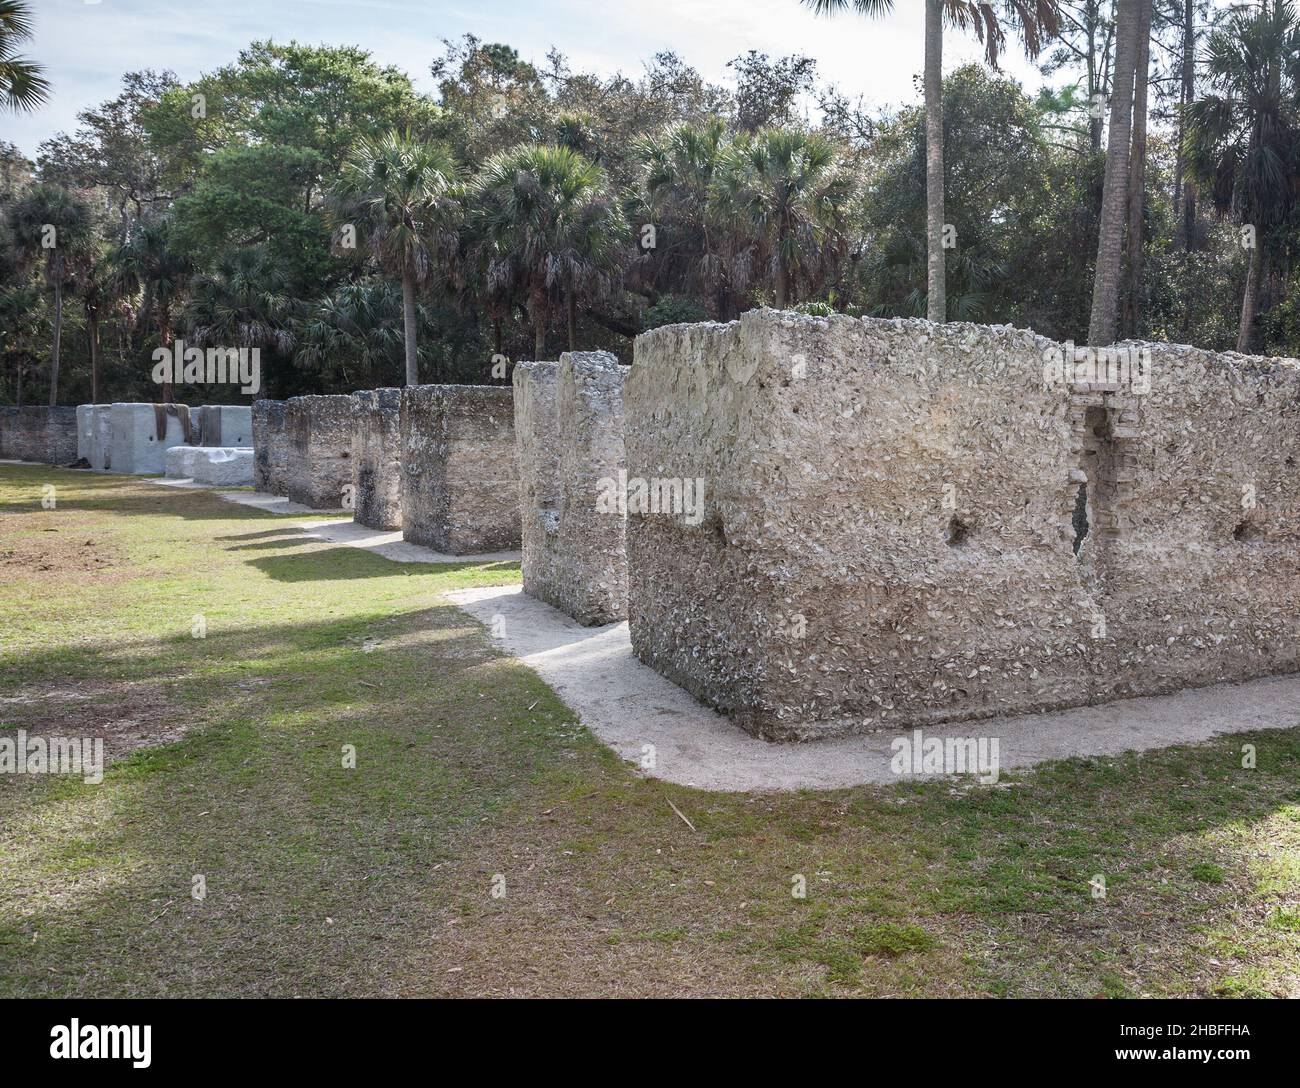 Cabine slave in cemento tabby a Kingsley Plantation, Florida. Foto Stock